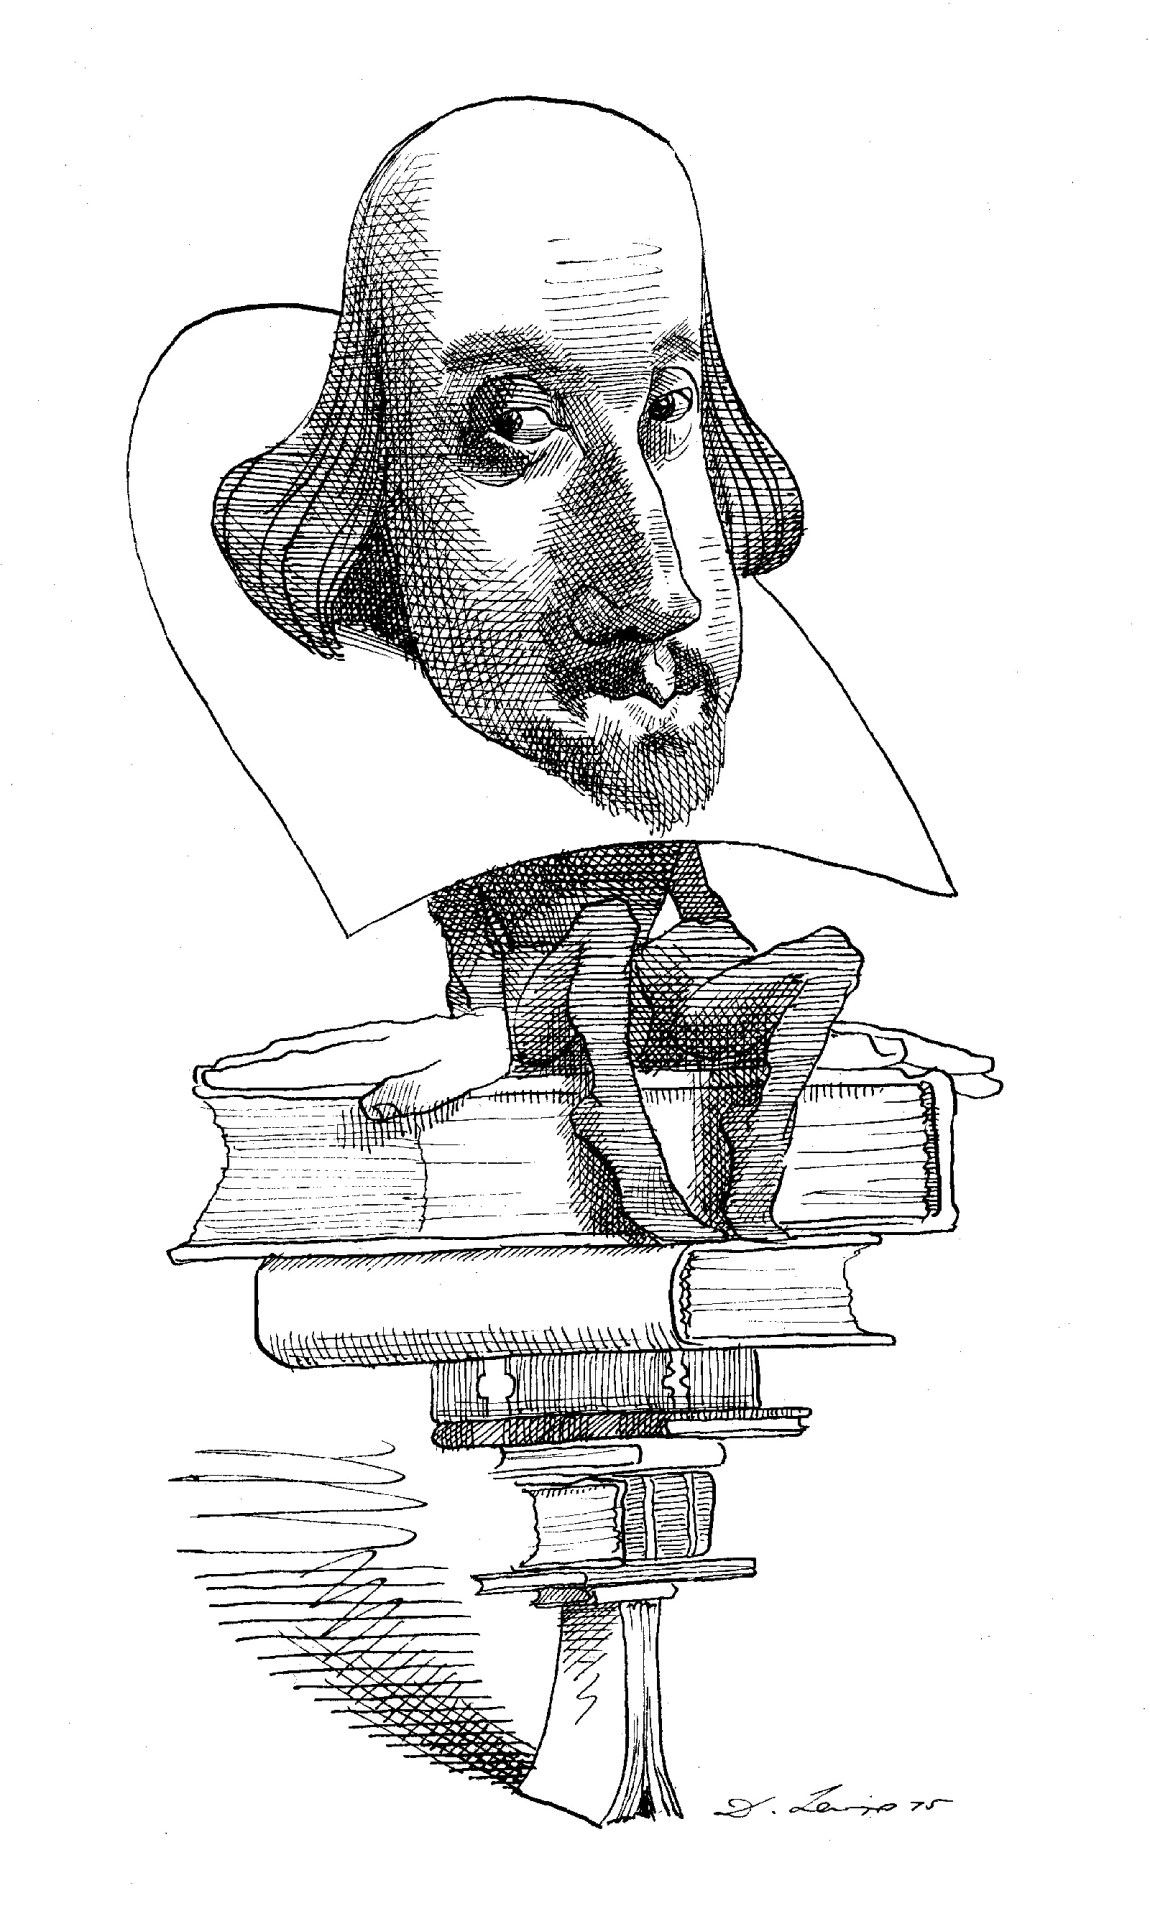 William Shakespeare; drawing by David Levine